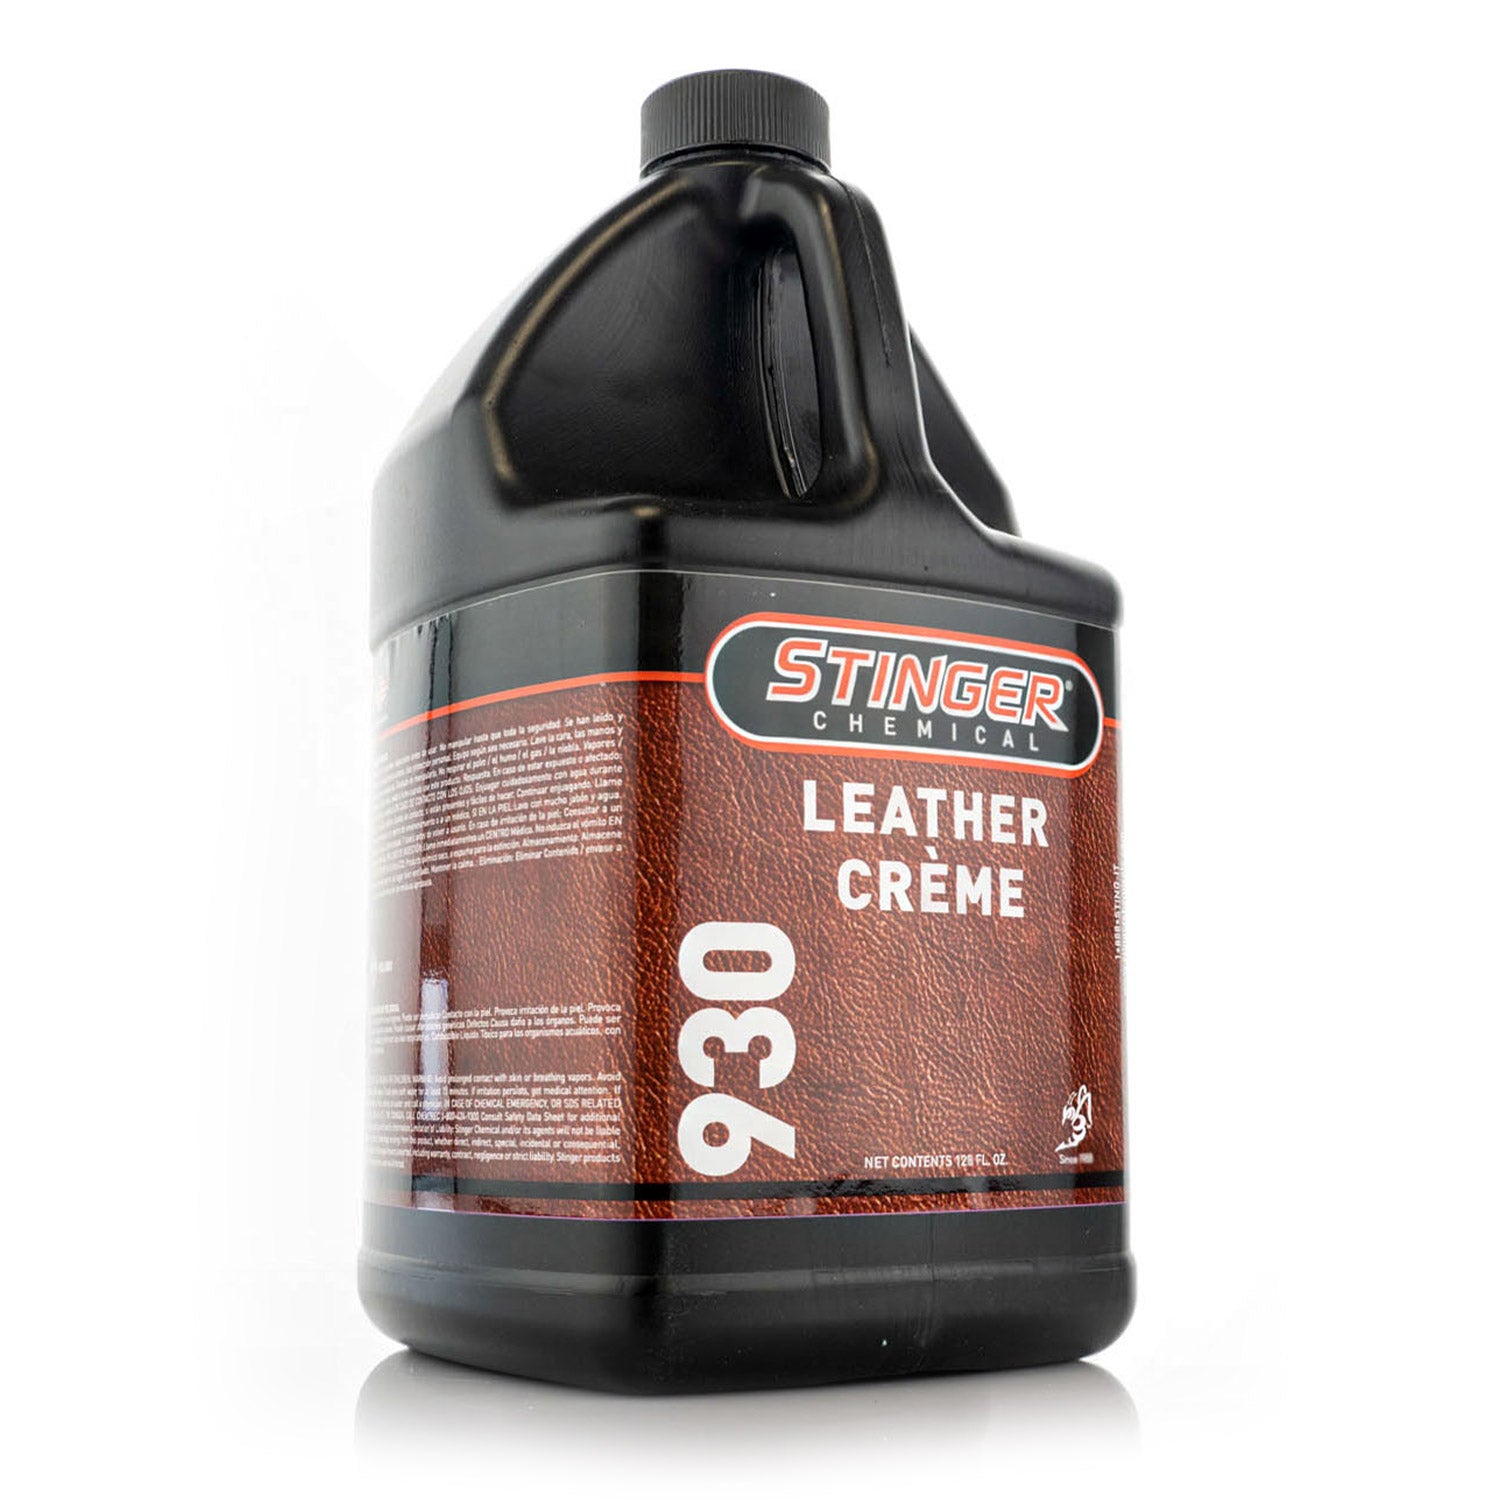 stinger-chemicals-leather-crème-in-a-gallon-container-with-lid